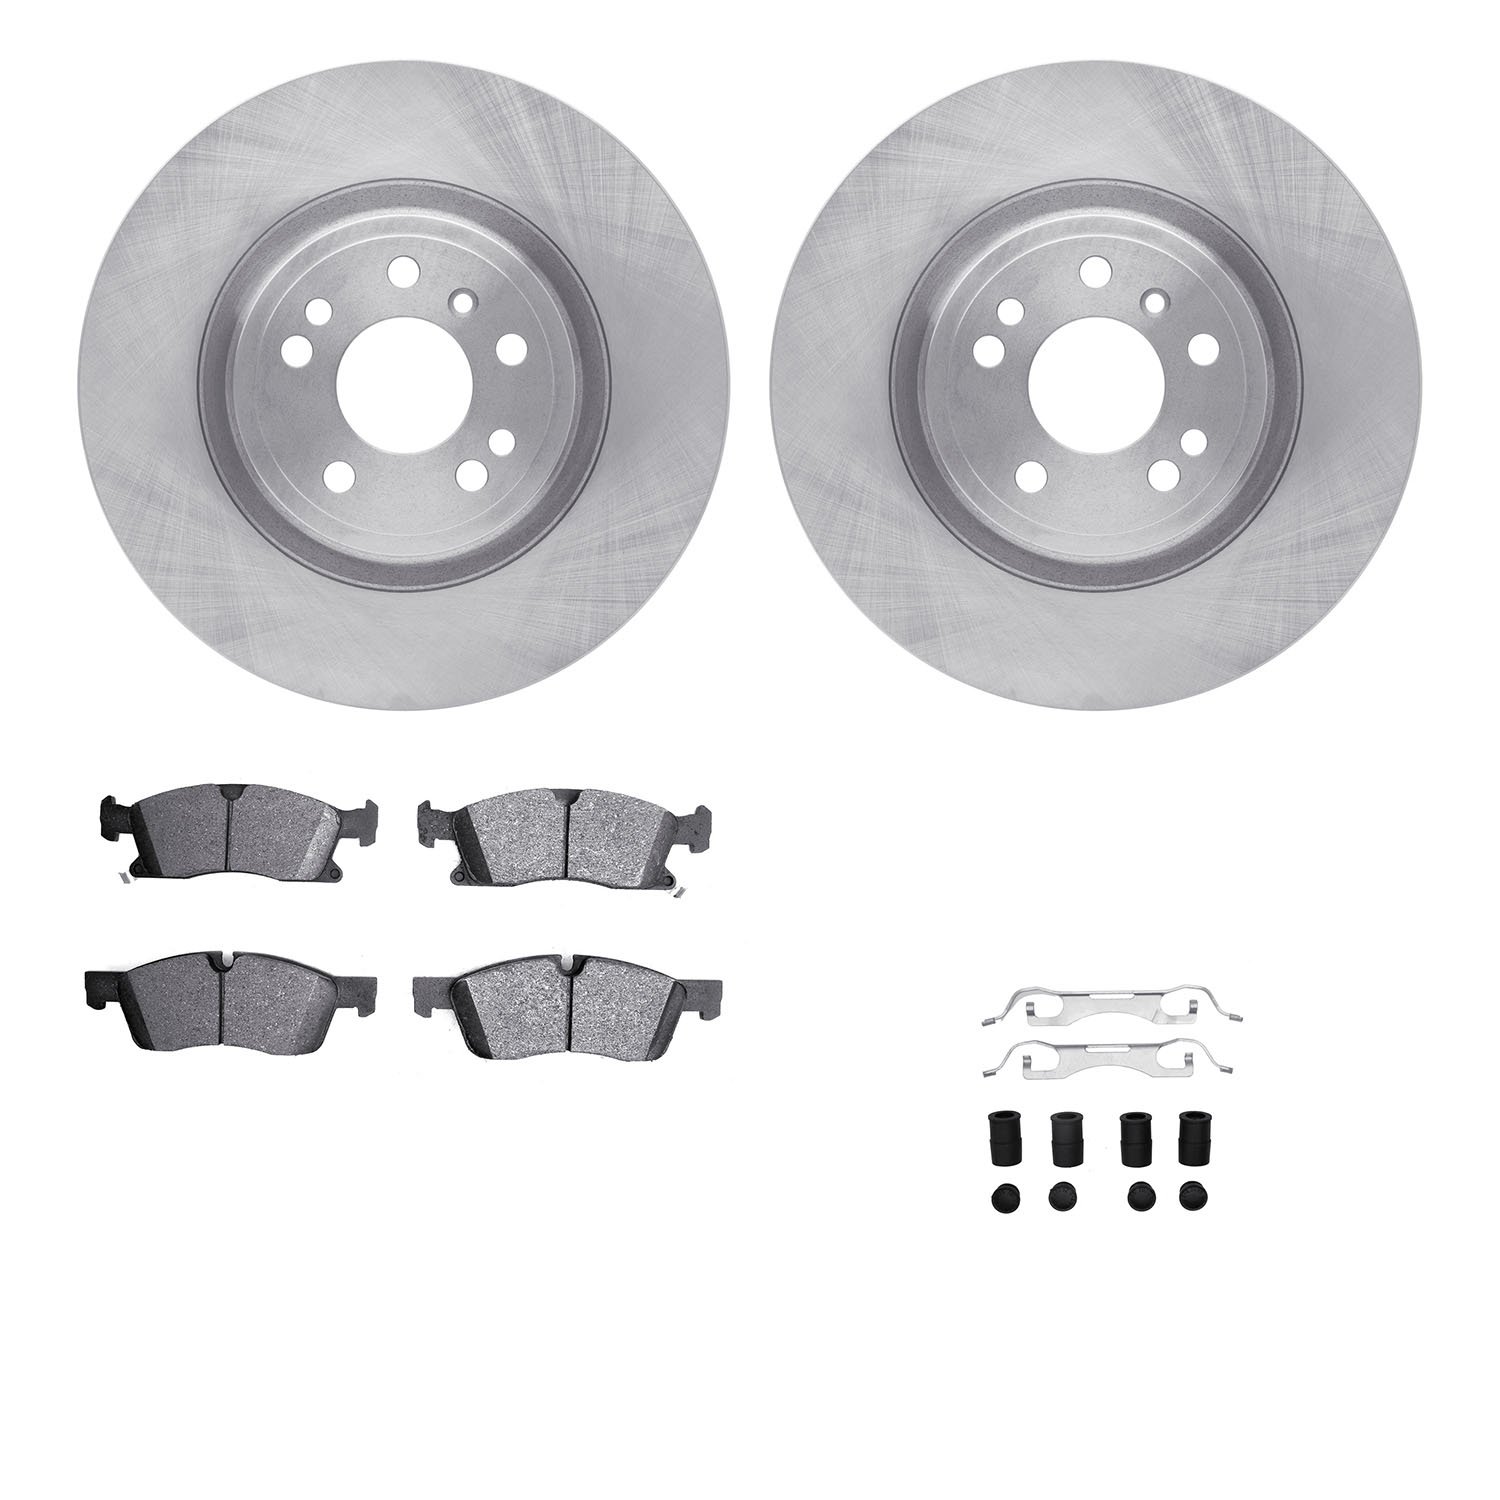 6412-63001 Brake Rotors with Ultimate-Duty Brake Pads Kit & Hardware, 2012-2018 Mercedes-Benz, Position: Front